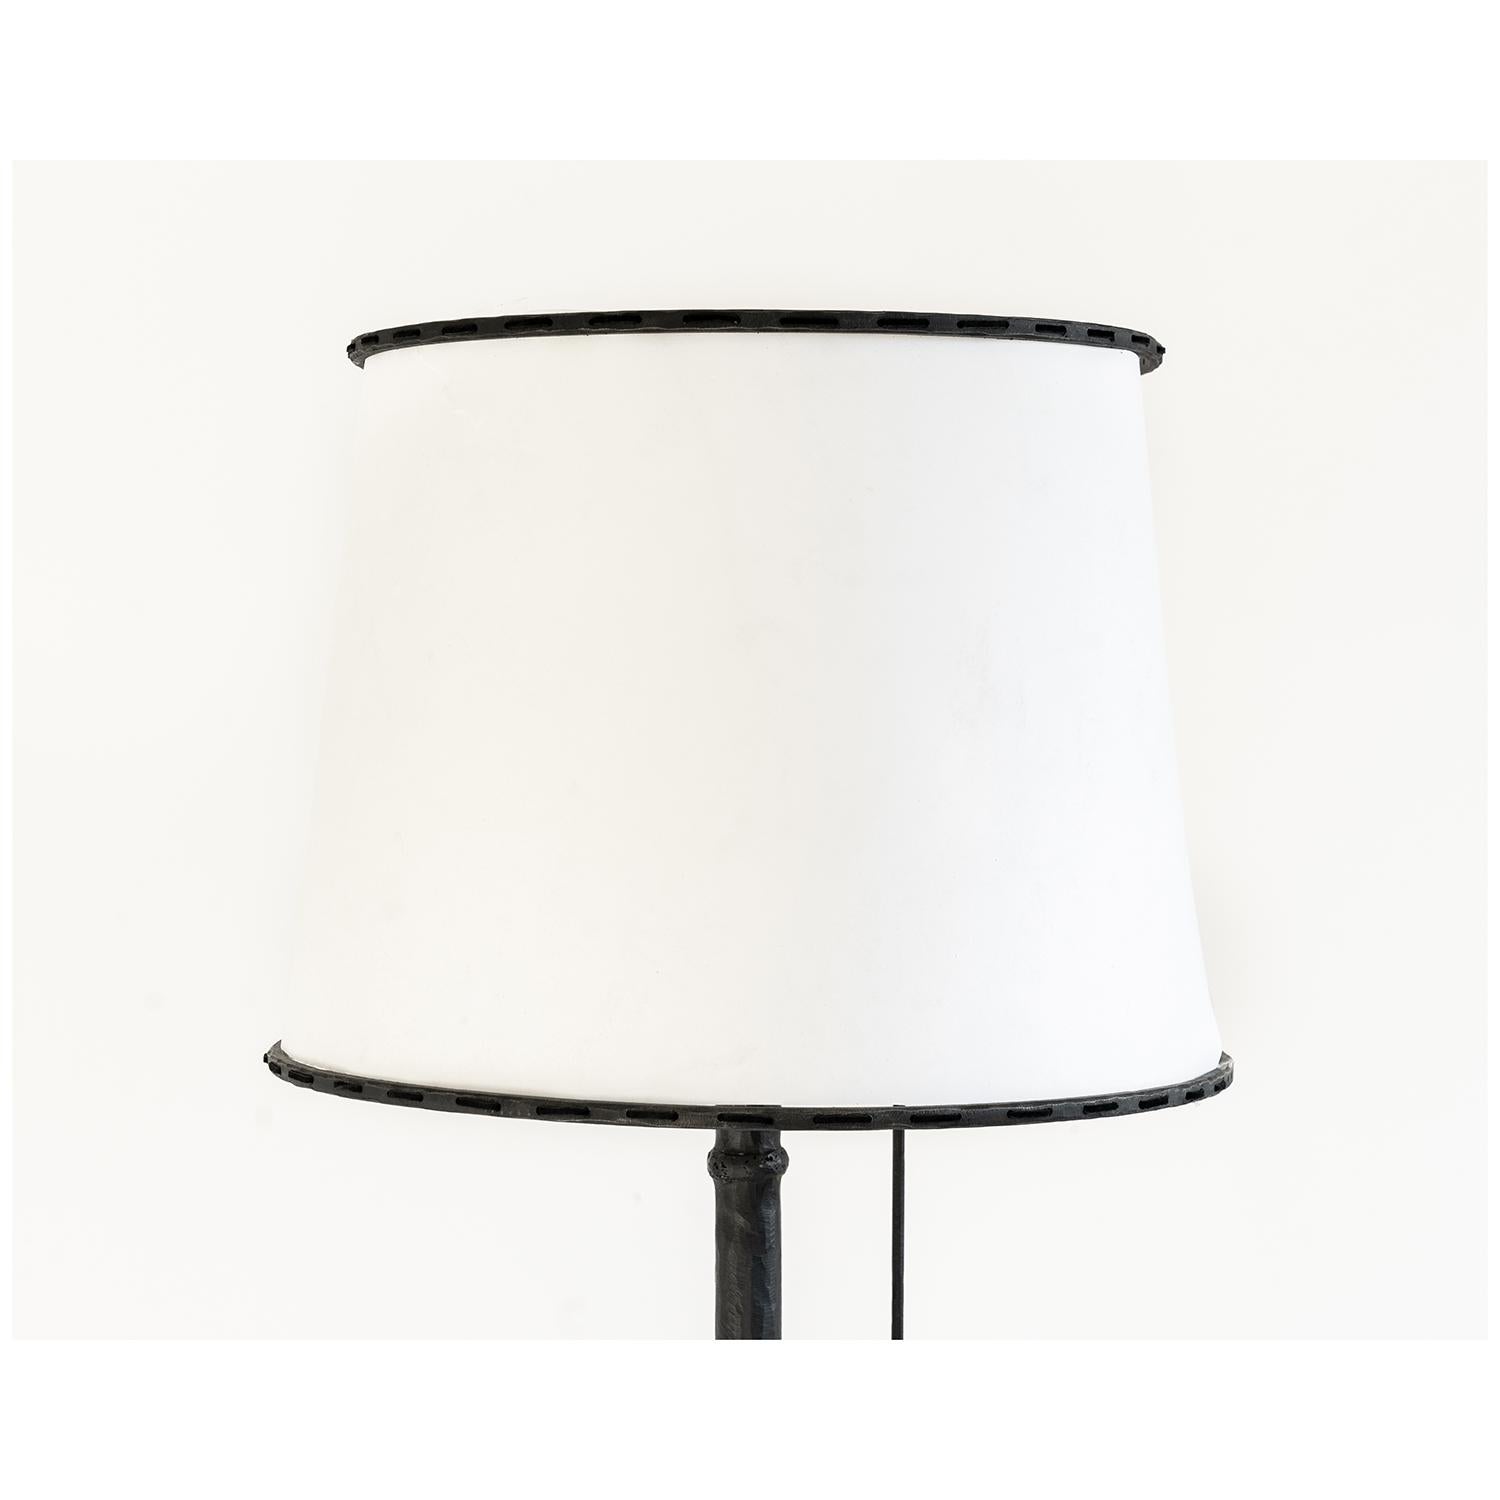 American Floor Lamp Classic Contemporary Hand-sculpted Blackened Steel and Linen Shade For Sale